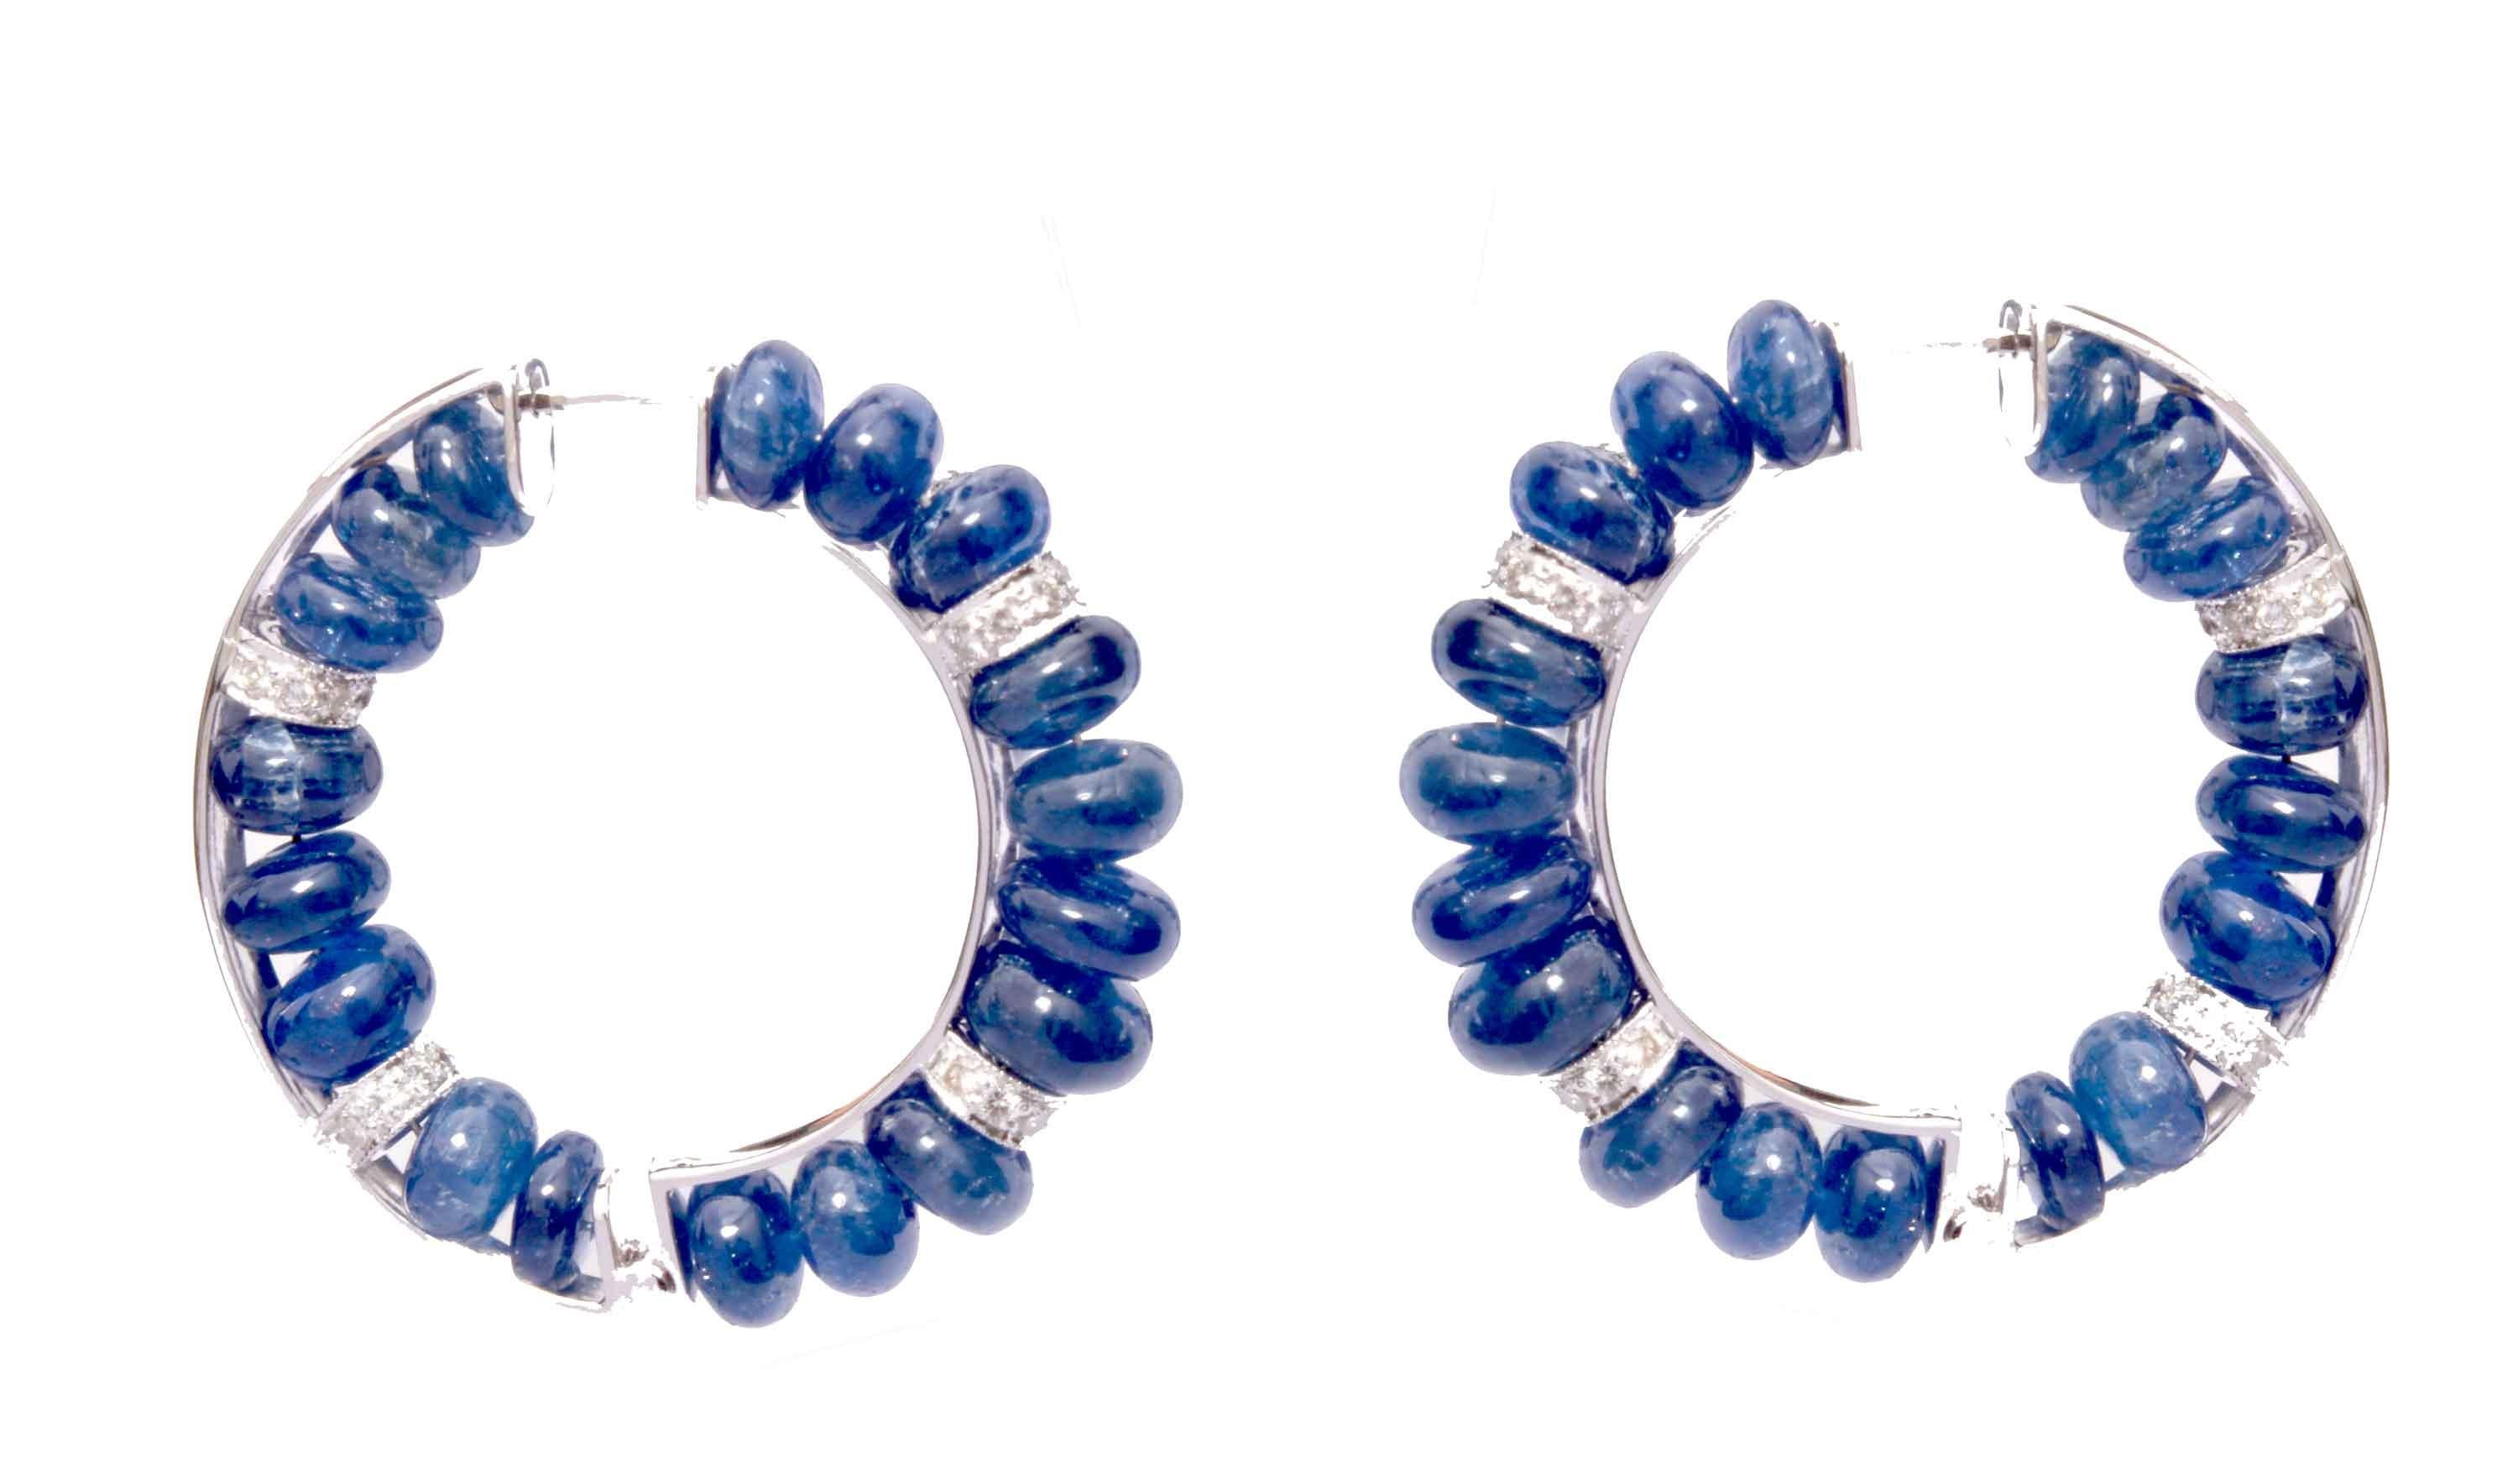 A very beautiful sapphire hoop earrings is easy to wear many occasions and day time and party time. This pair of hoops embellished with 36 pieces of blue sapphires weighing 64.06 carats, with 56 pieces of round cut white diamonds weighing 0.95